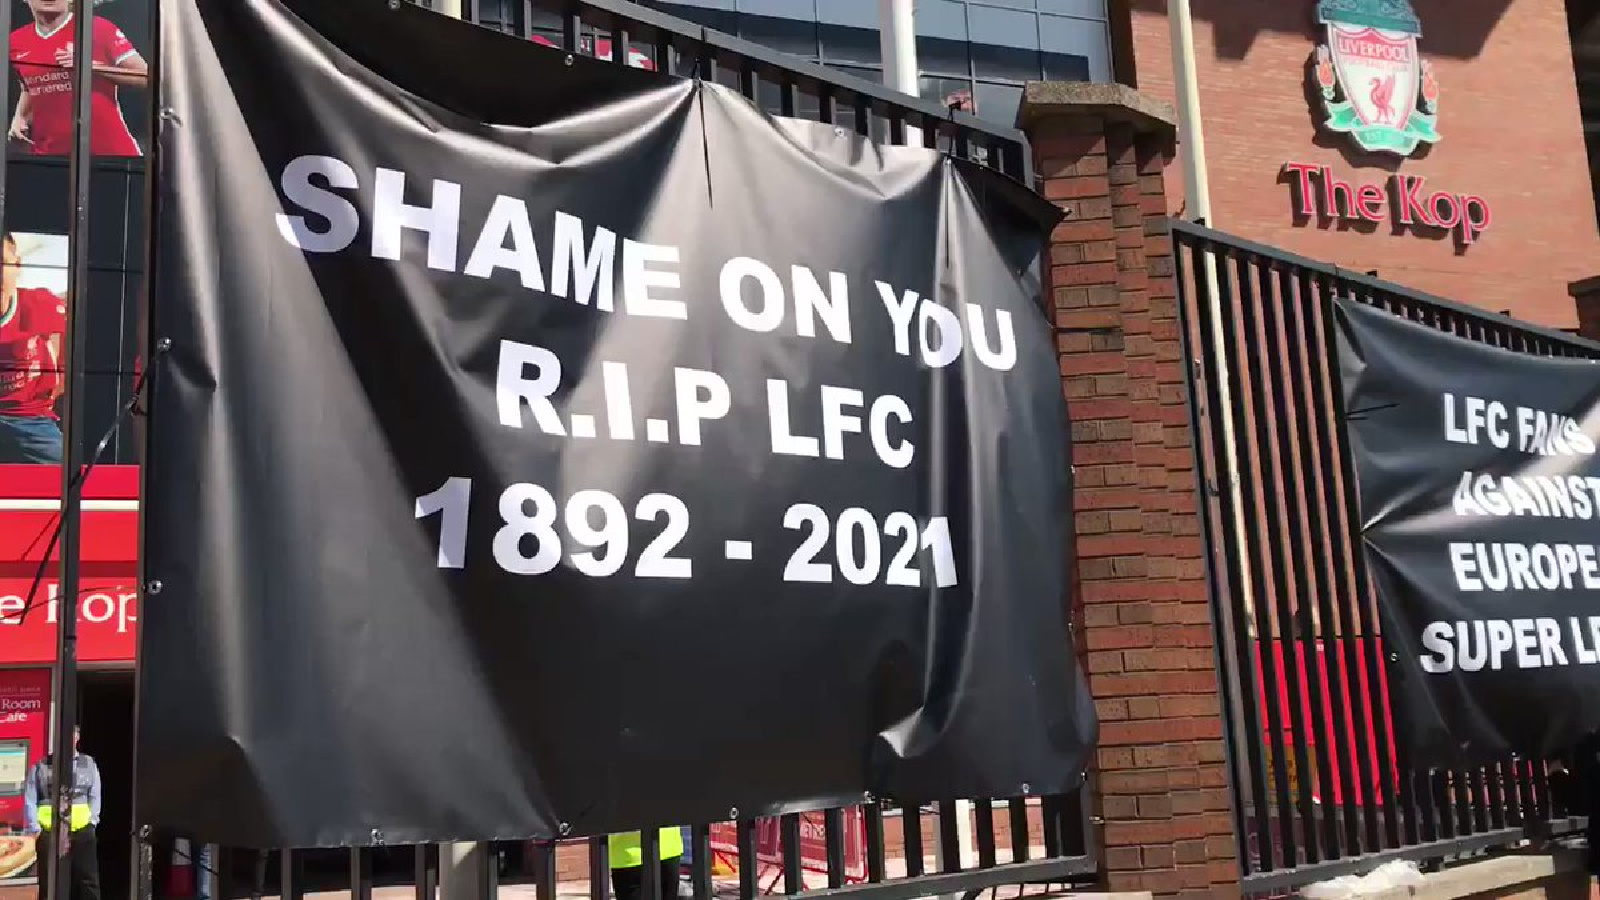 Liverpool fans protest against the Super League as ‘RIP LFC’ banner is hung outside Anfield